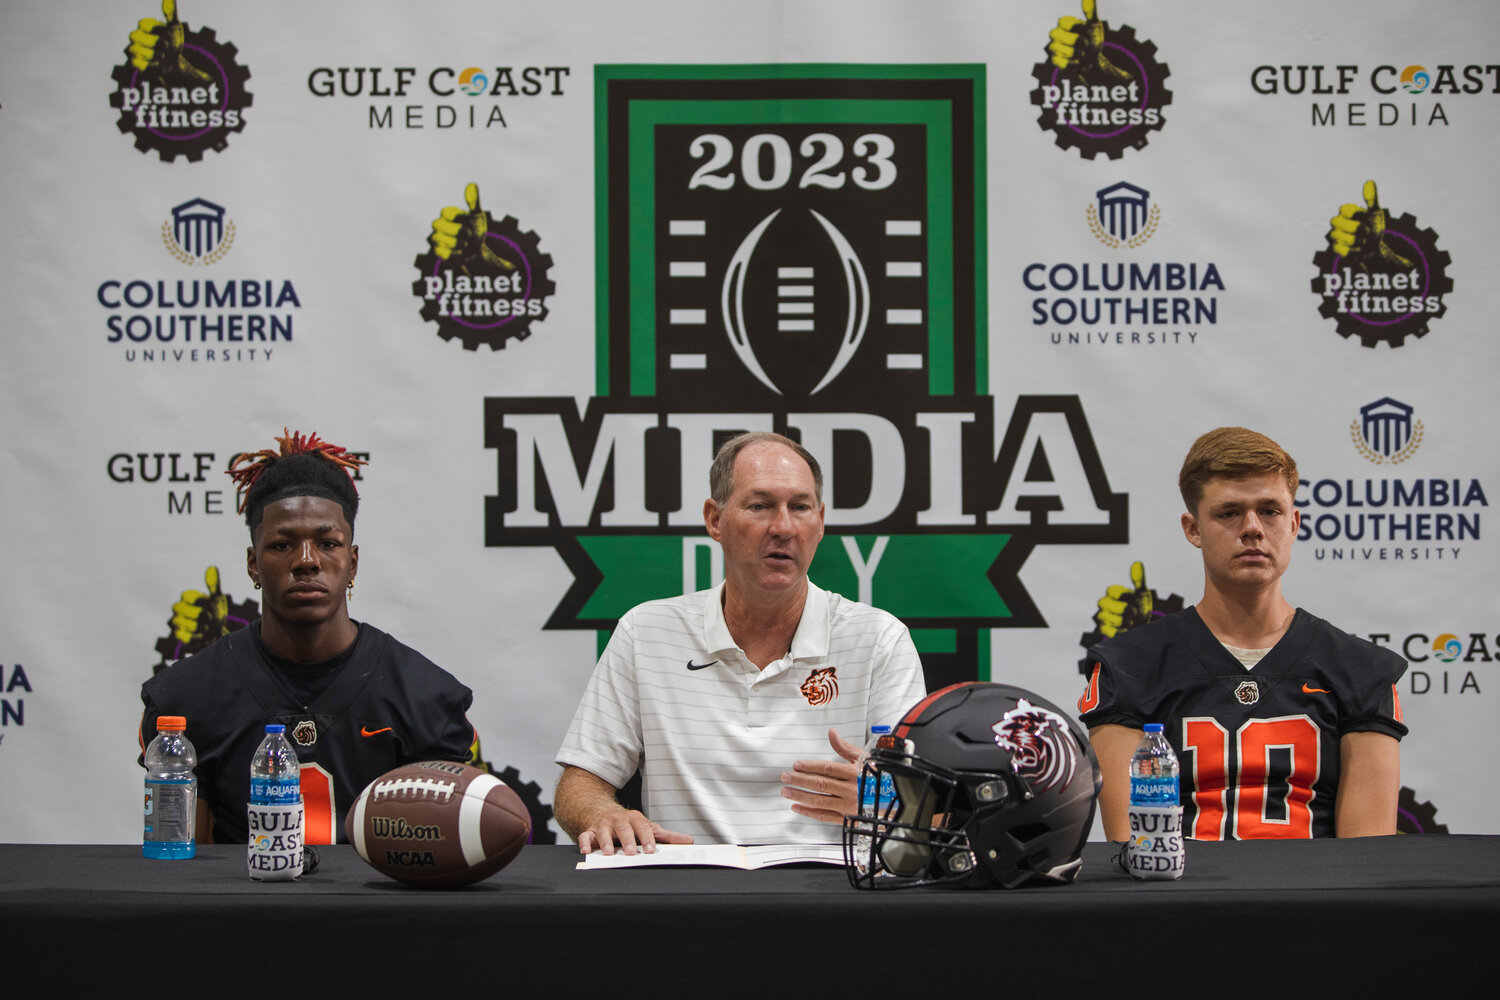 The Baldwin County Tigers were among the local teams featured at the Orange Beach Event Center on July 27 as part of the second-annual Gulf Coast Media Day. The team from Bay Minette is primed for a bounce-back season with a strong offensive unit ready to take over.